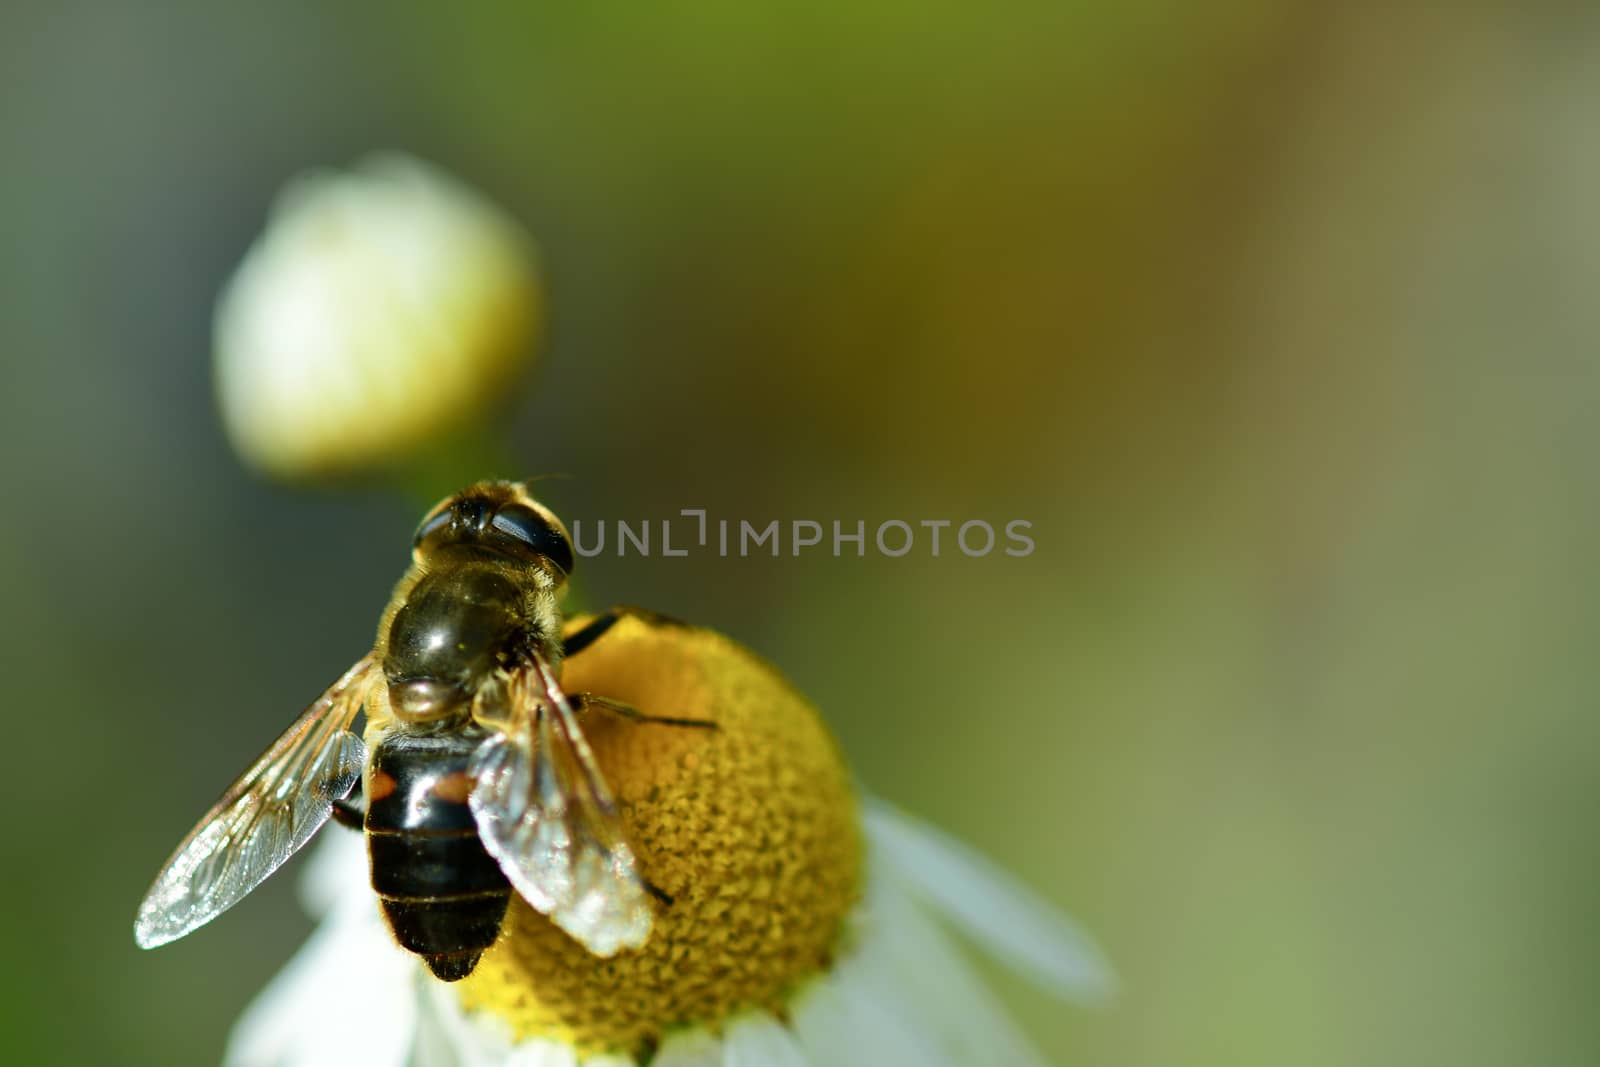 Macro of a Hoverfly. Hoverflies, also called flower flies or syrphid flies, make up the insect family Syrphidae. by Marshalkina